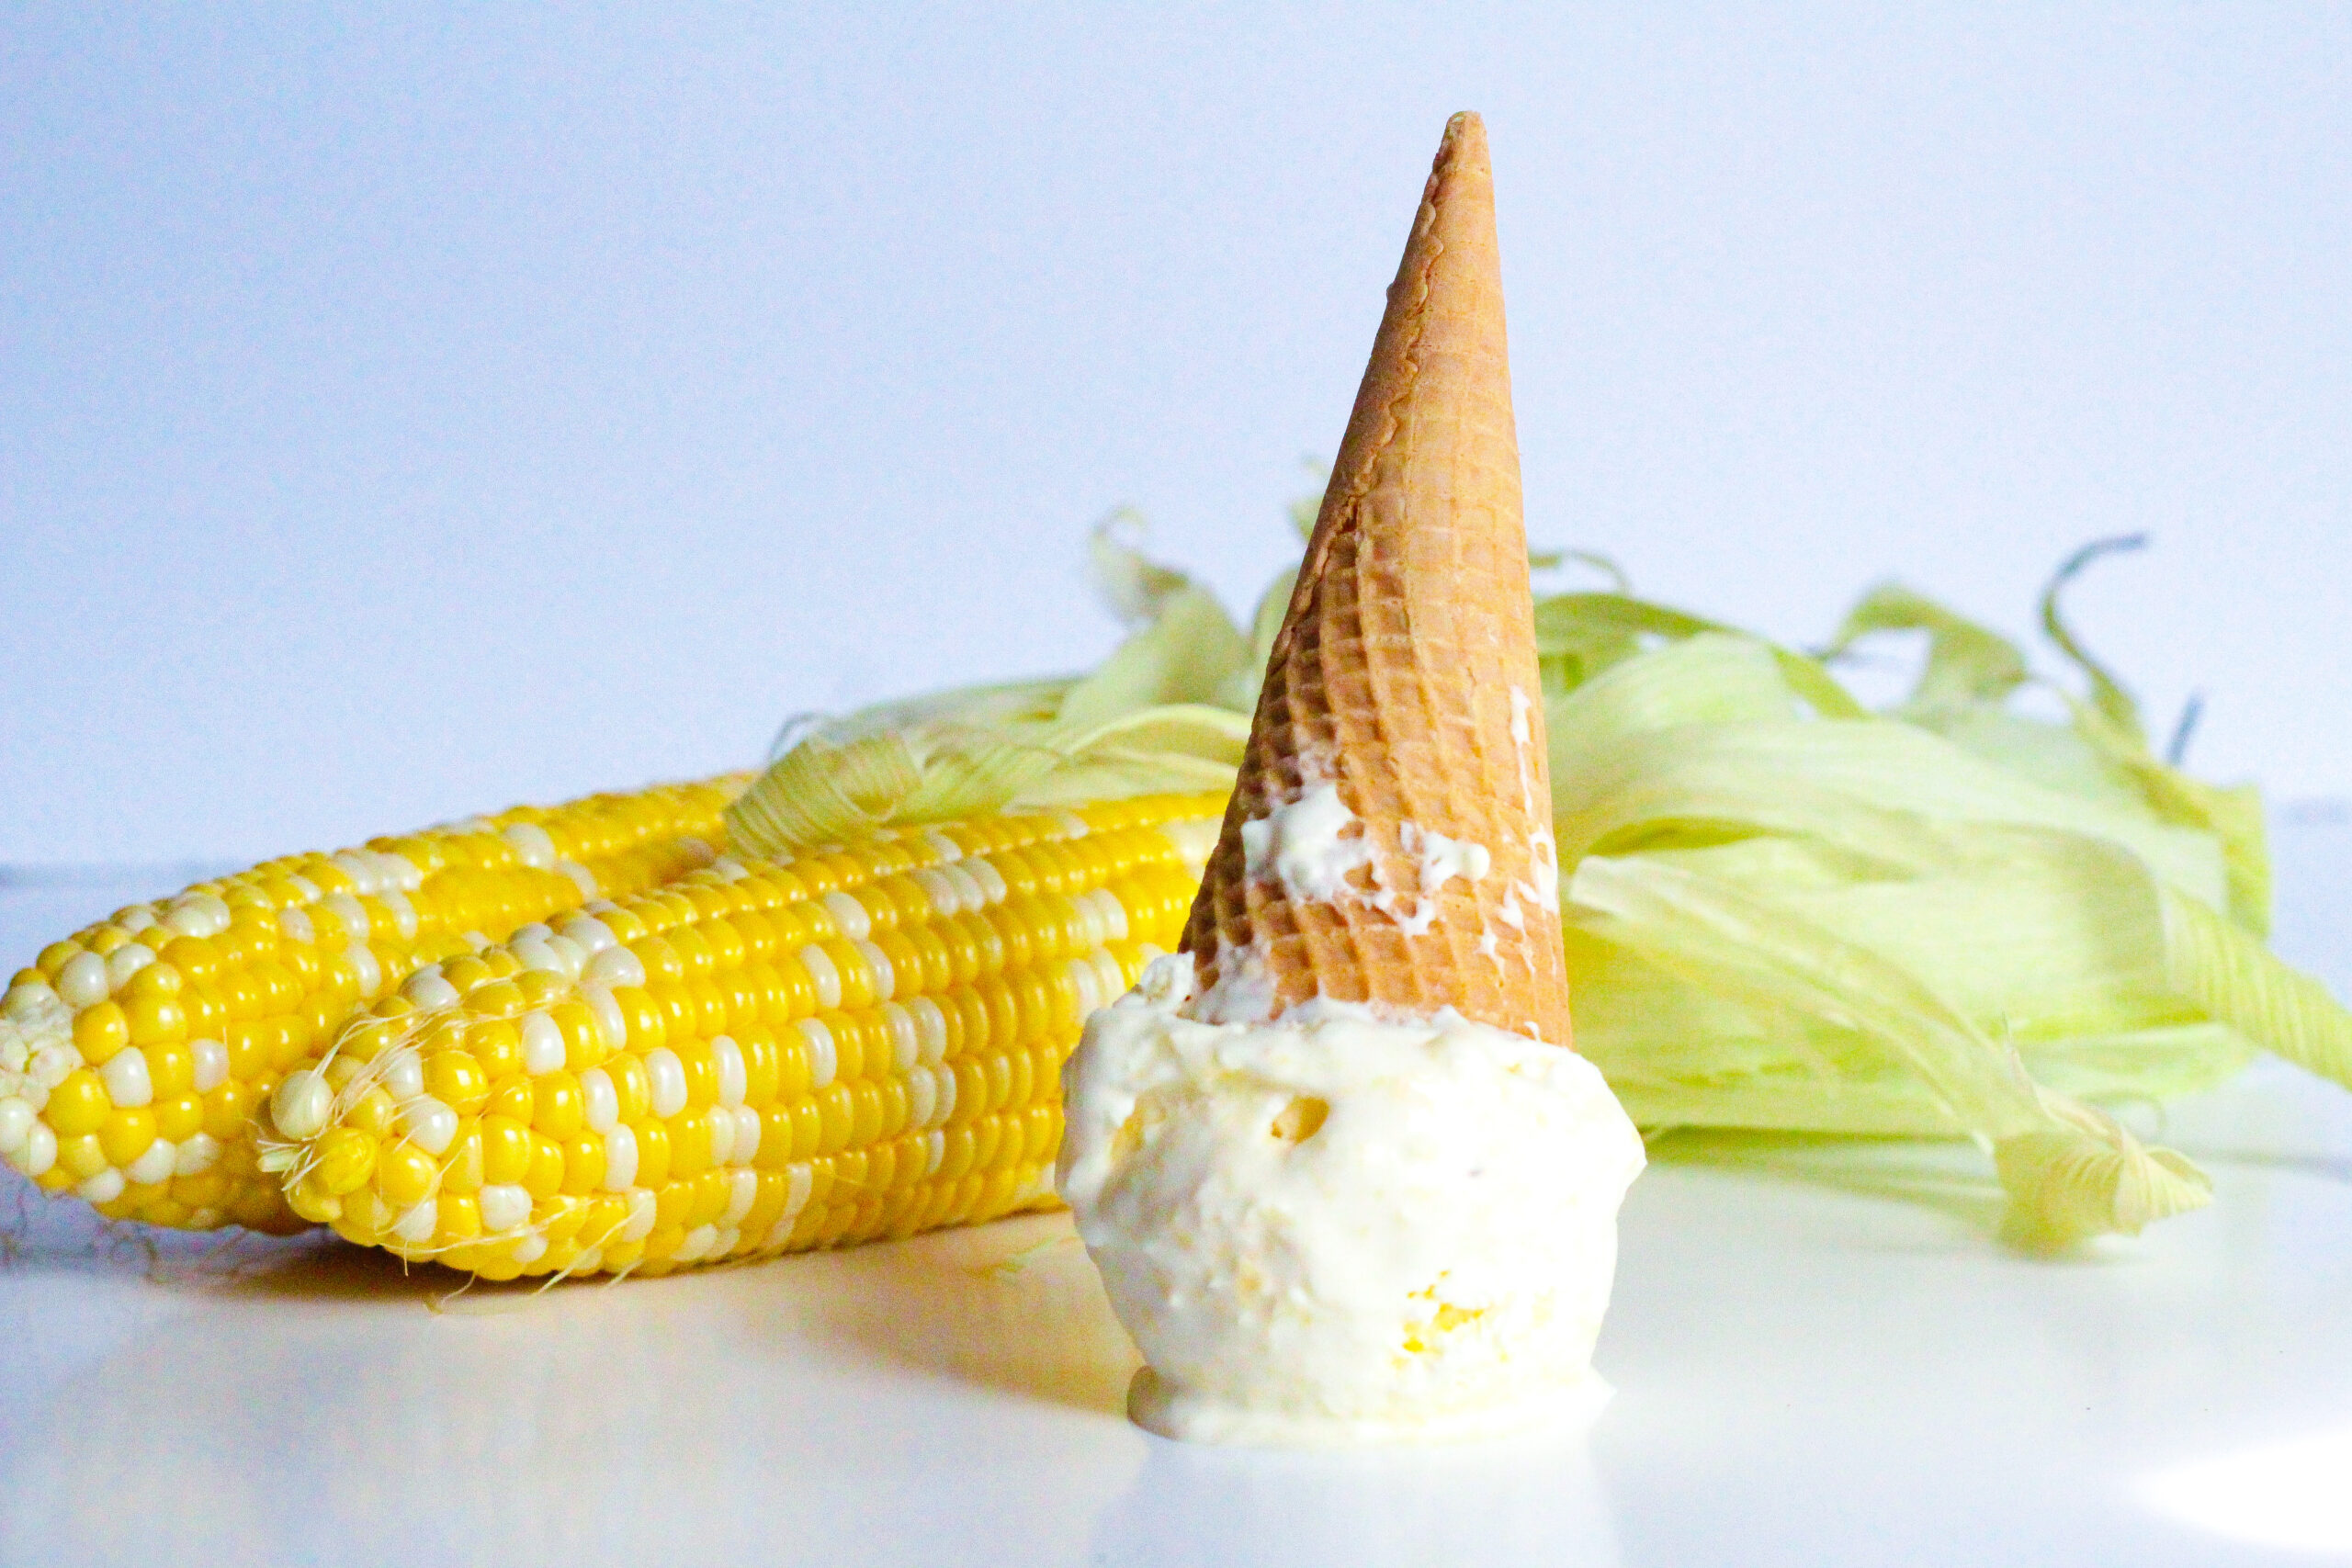 Side view of a scoop of sweet corn ice cream on a white surface with a cone going up from the scoop. Two cobs of corn are in the background.